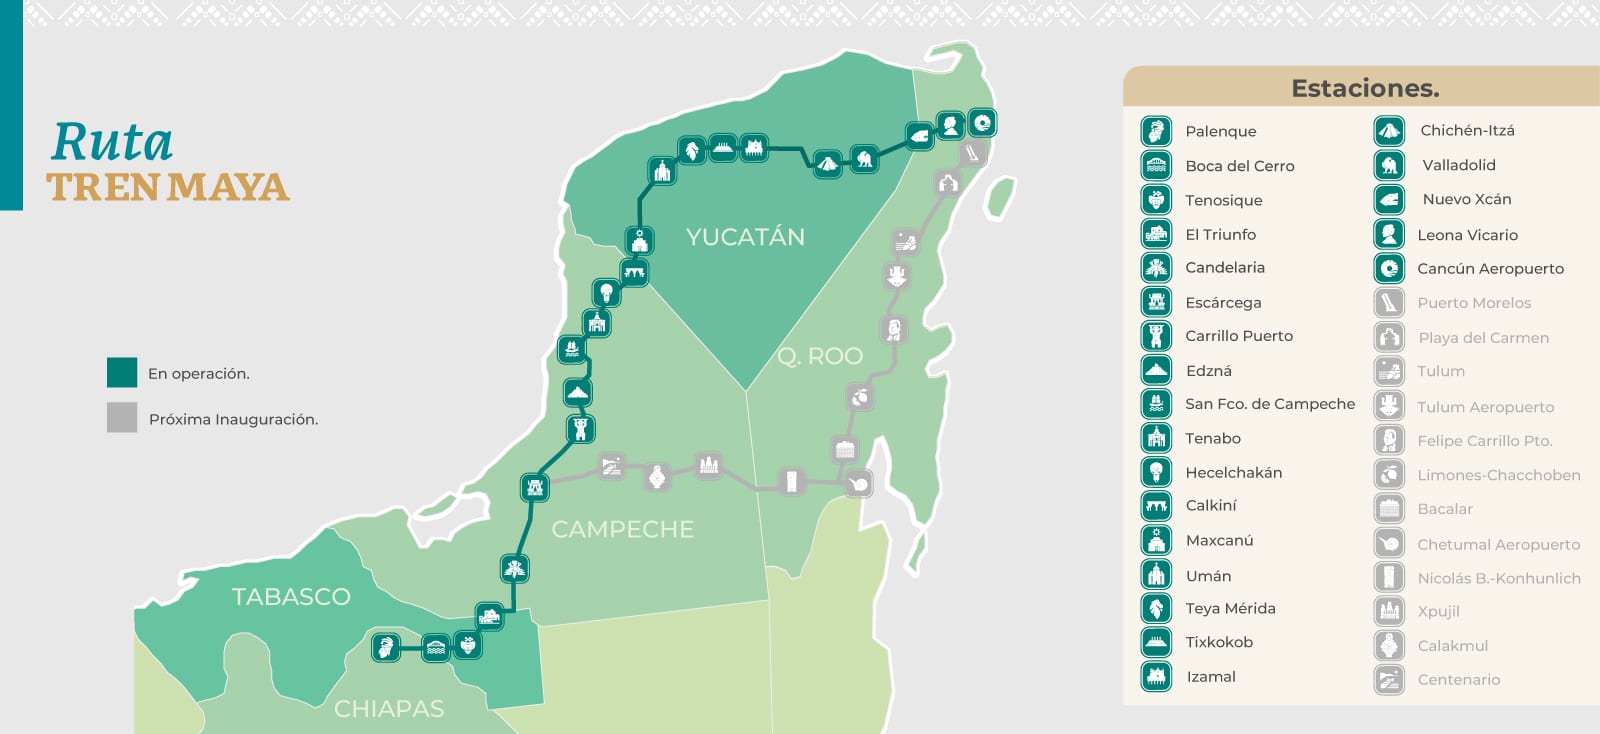 Infographic from Tren Maya about the cities and train stations along the Mayan Train routes.